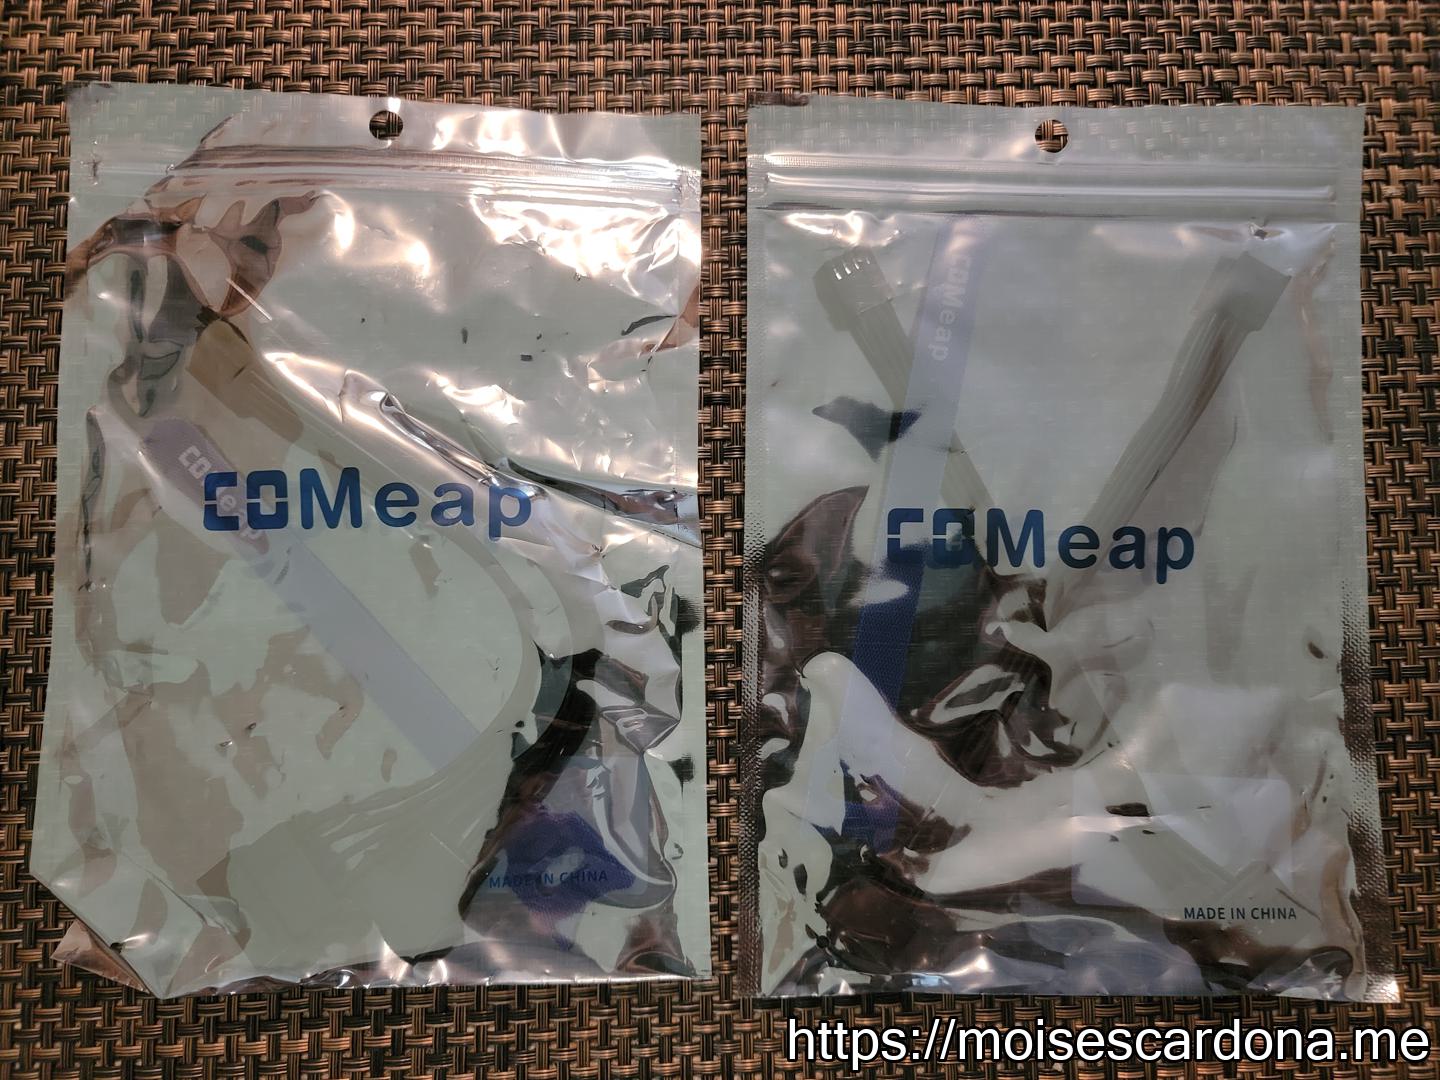 1 - COMeap SATA and MOLEX to Floppy FDD Power Adapter - Cables in bag